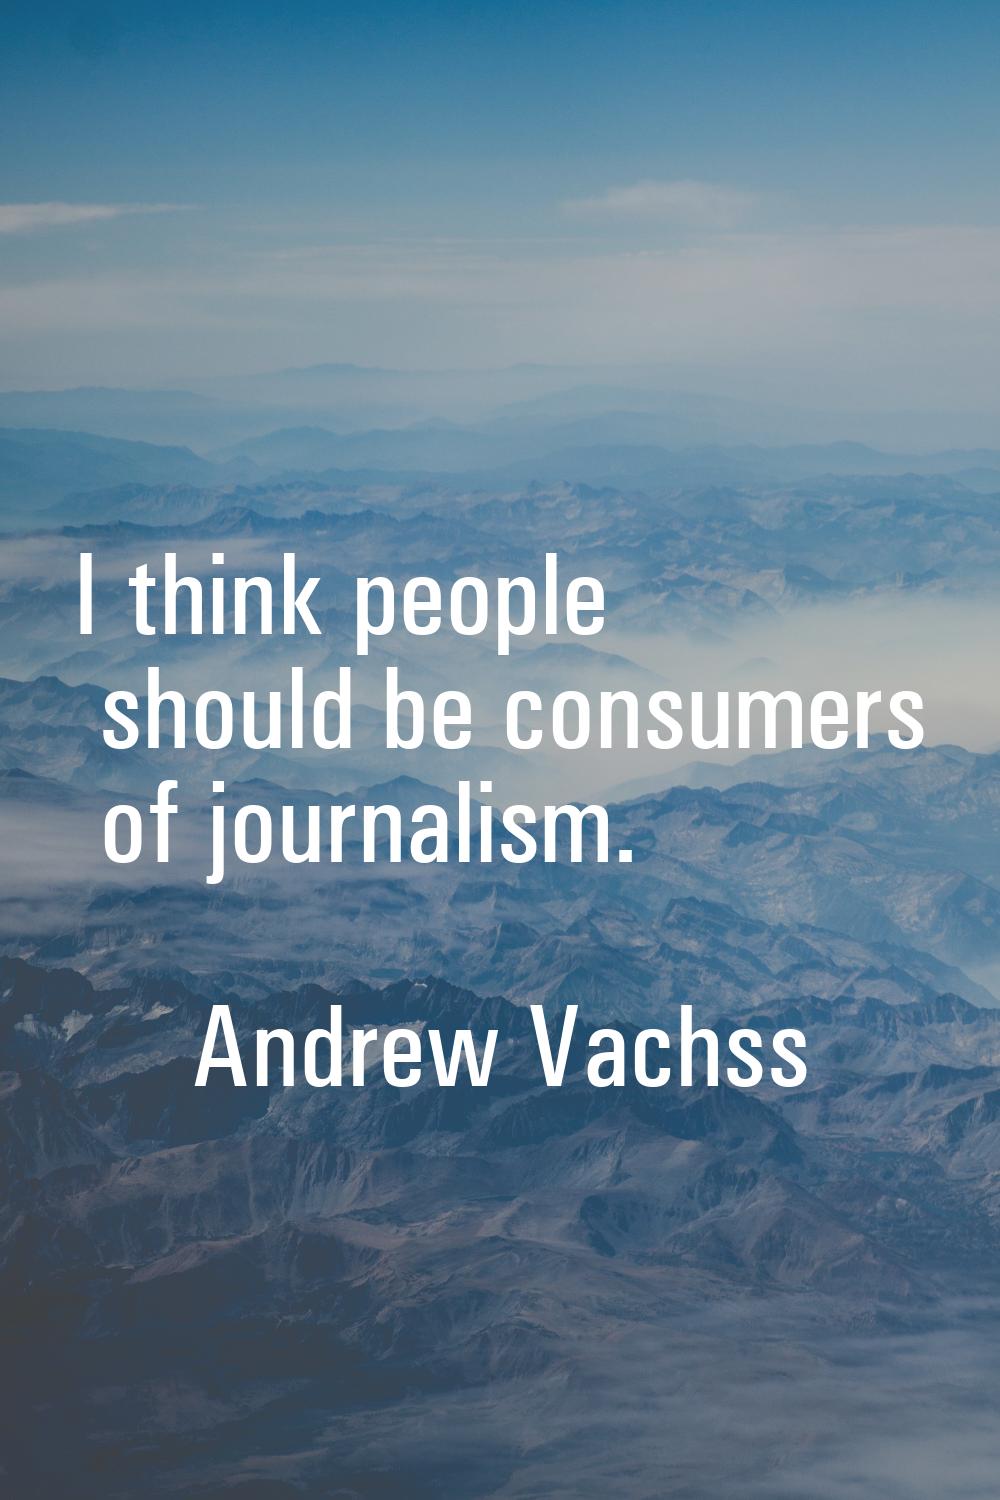 I think people should be consumers of journalism.